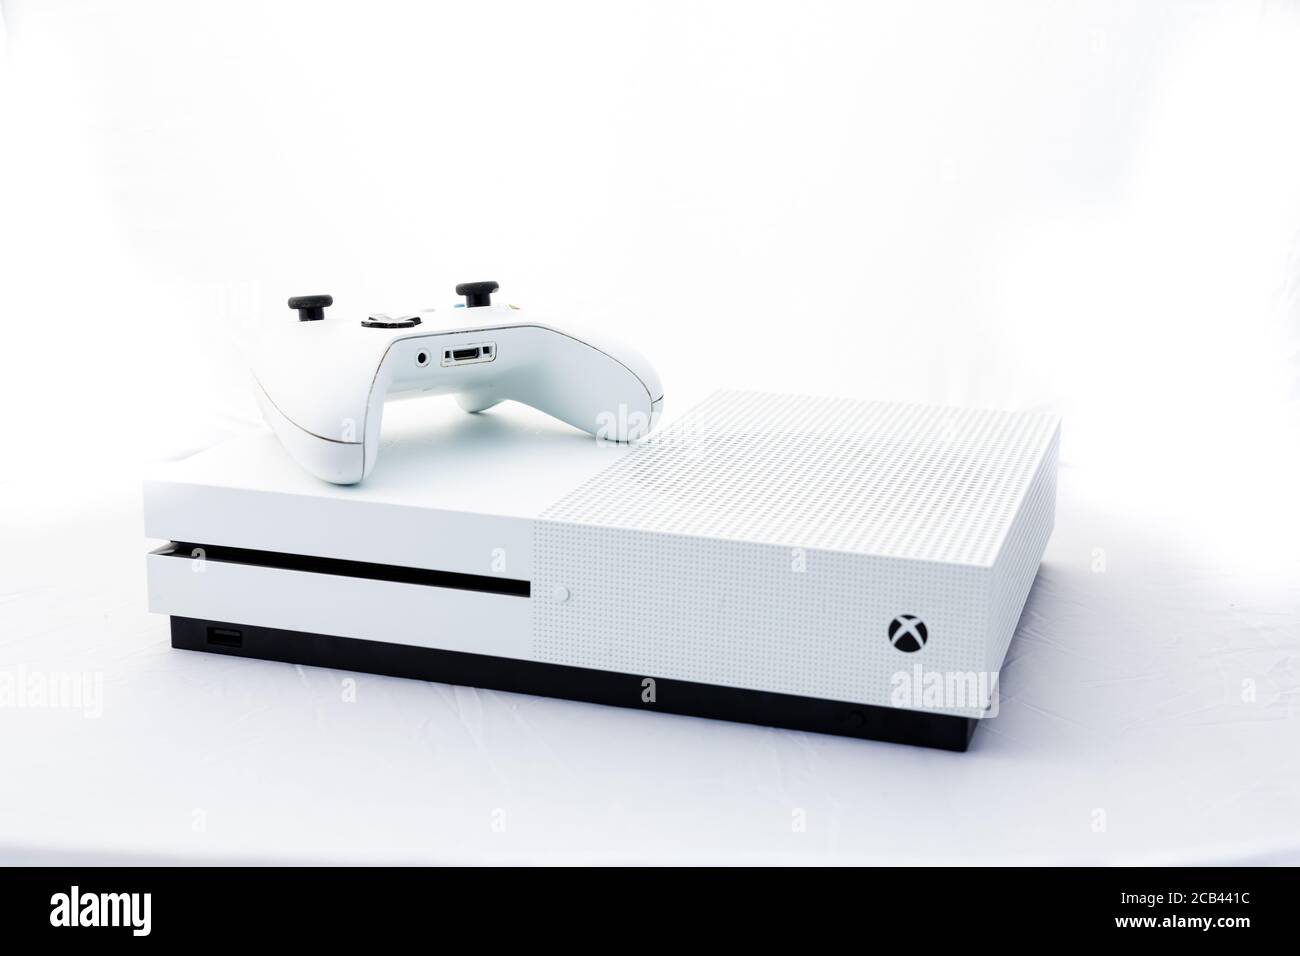 Suffolk, UK June 01 2020: A Microsoft Xbox One S gaming console with a wireless controller shot against a plain white background Stock Photo